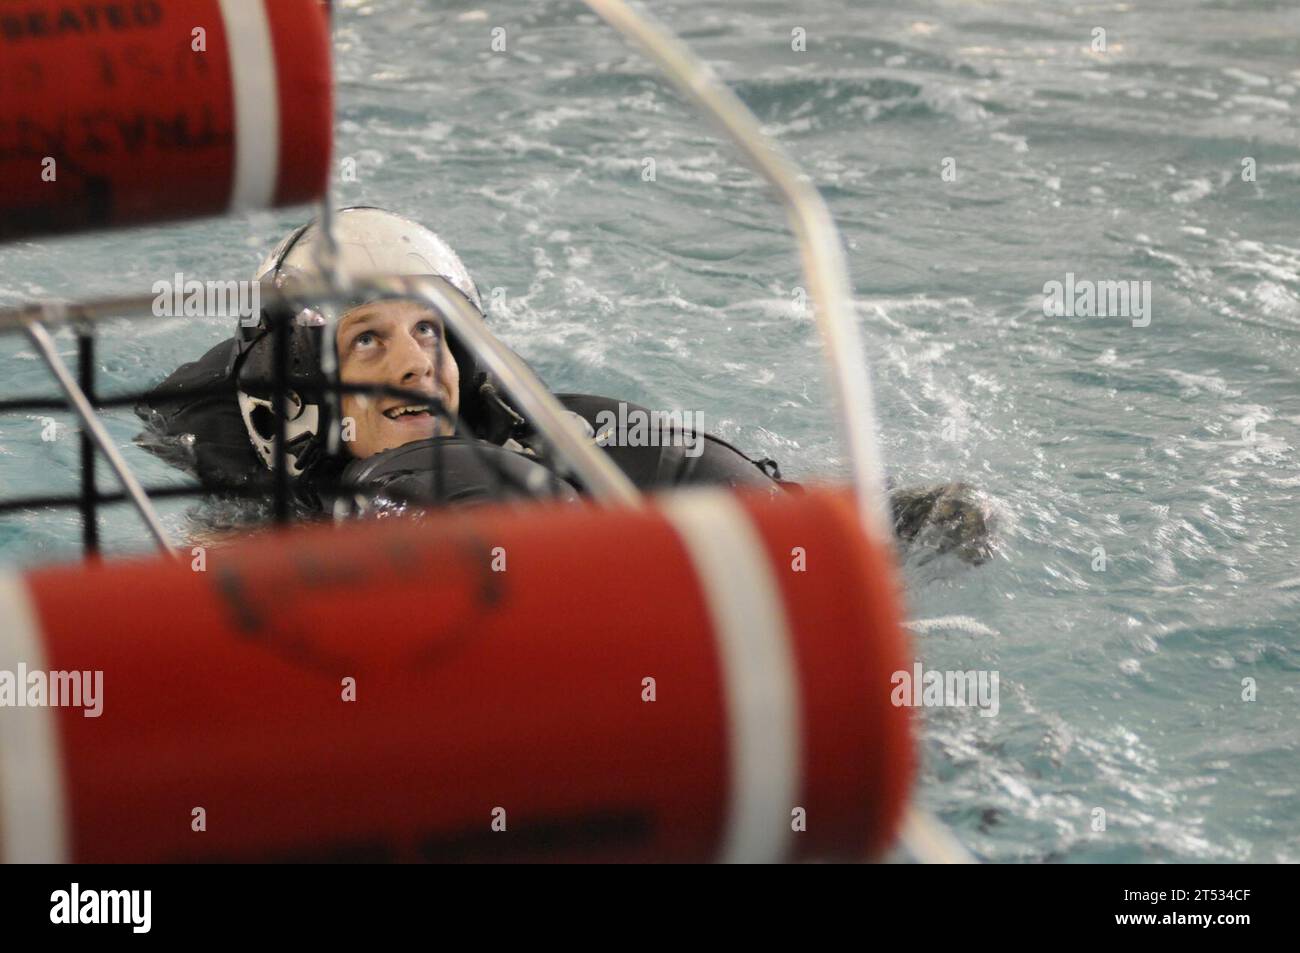 Aviation Survival Training Center, refresher course, Sailor, U.S. Navy, water survival Stock Photo